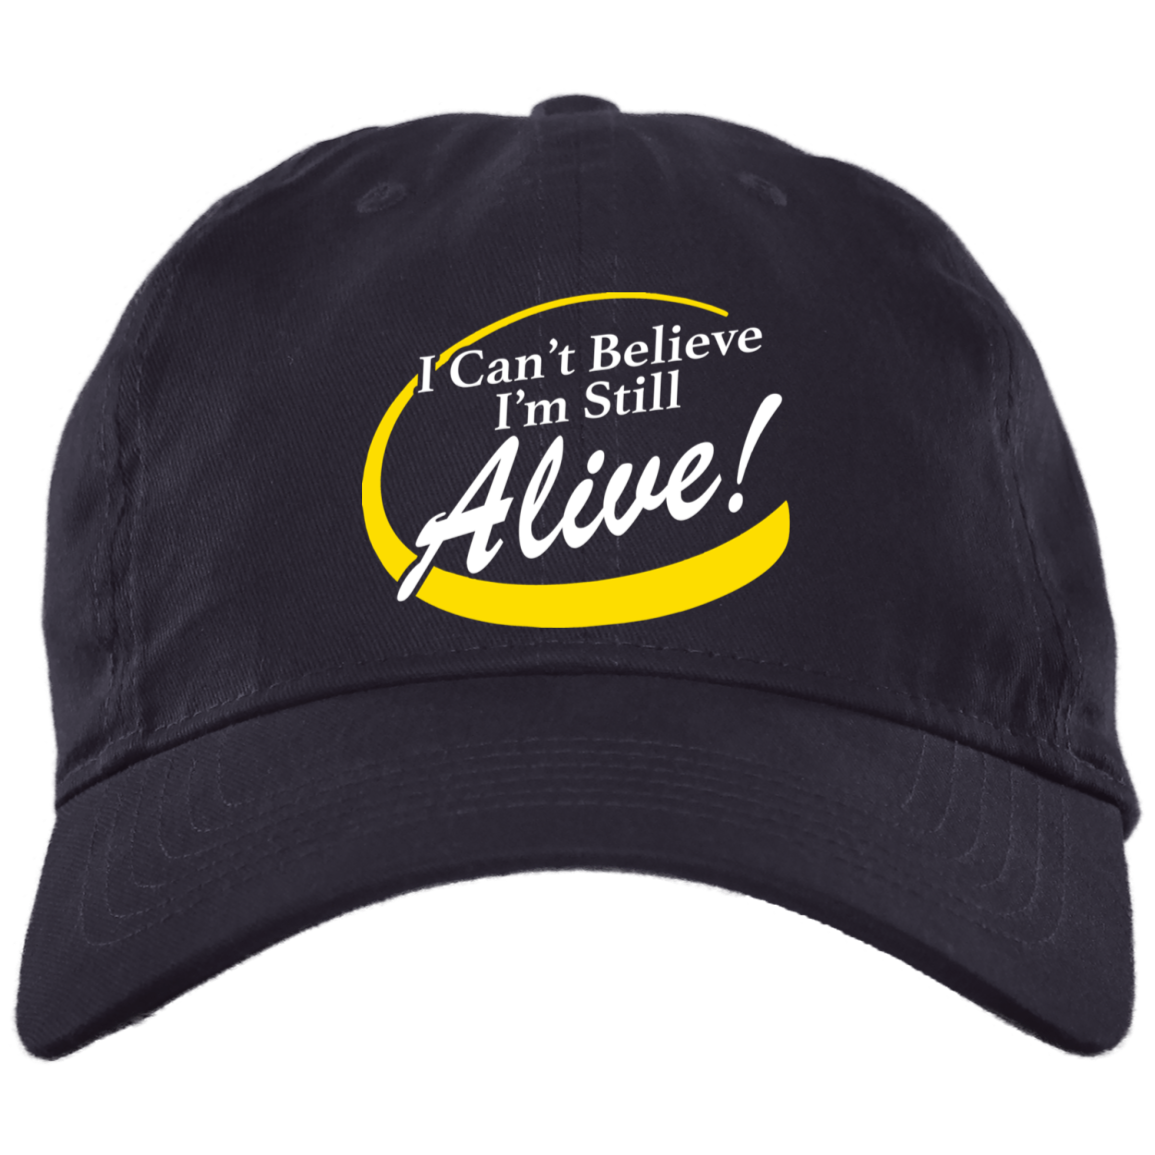 I Can't Believe I'm Still Alive! Hat